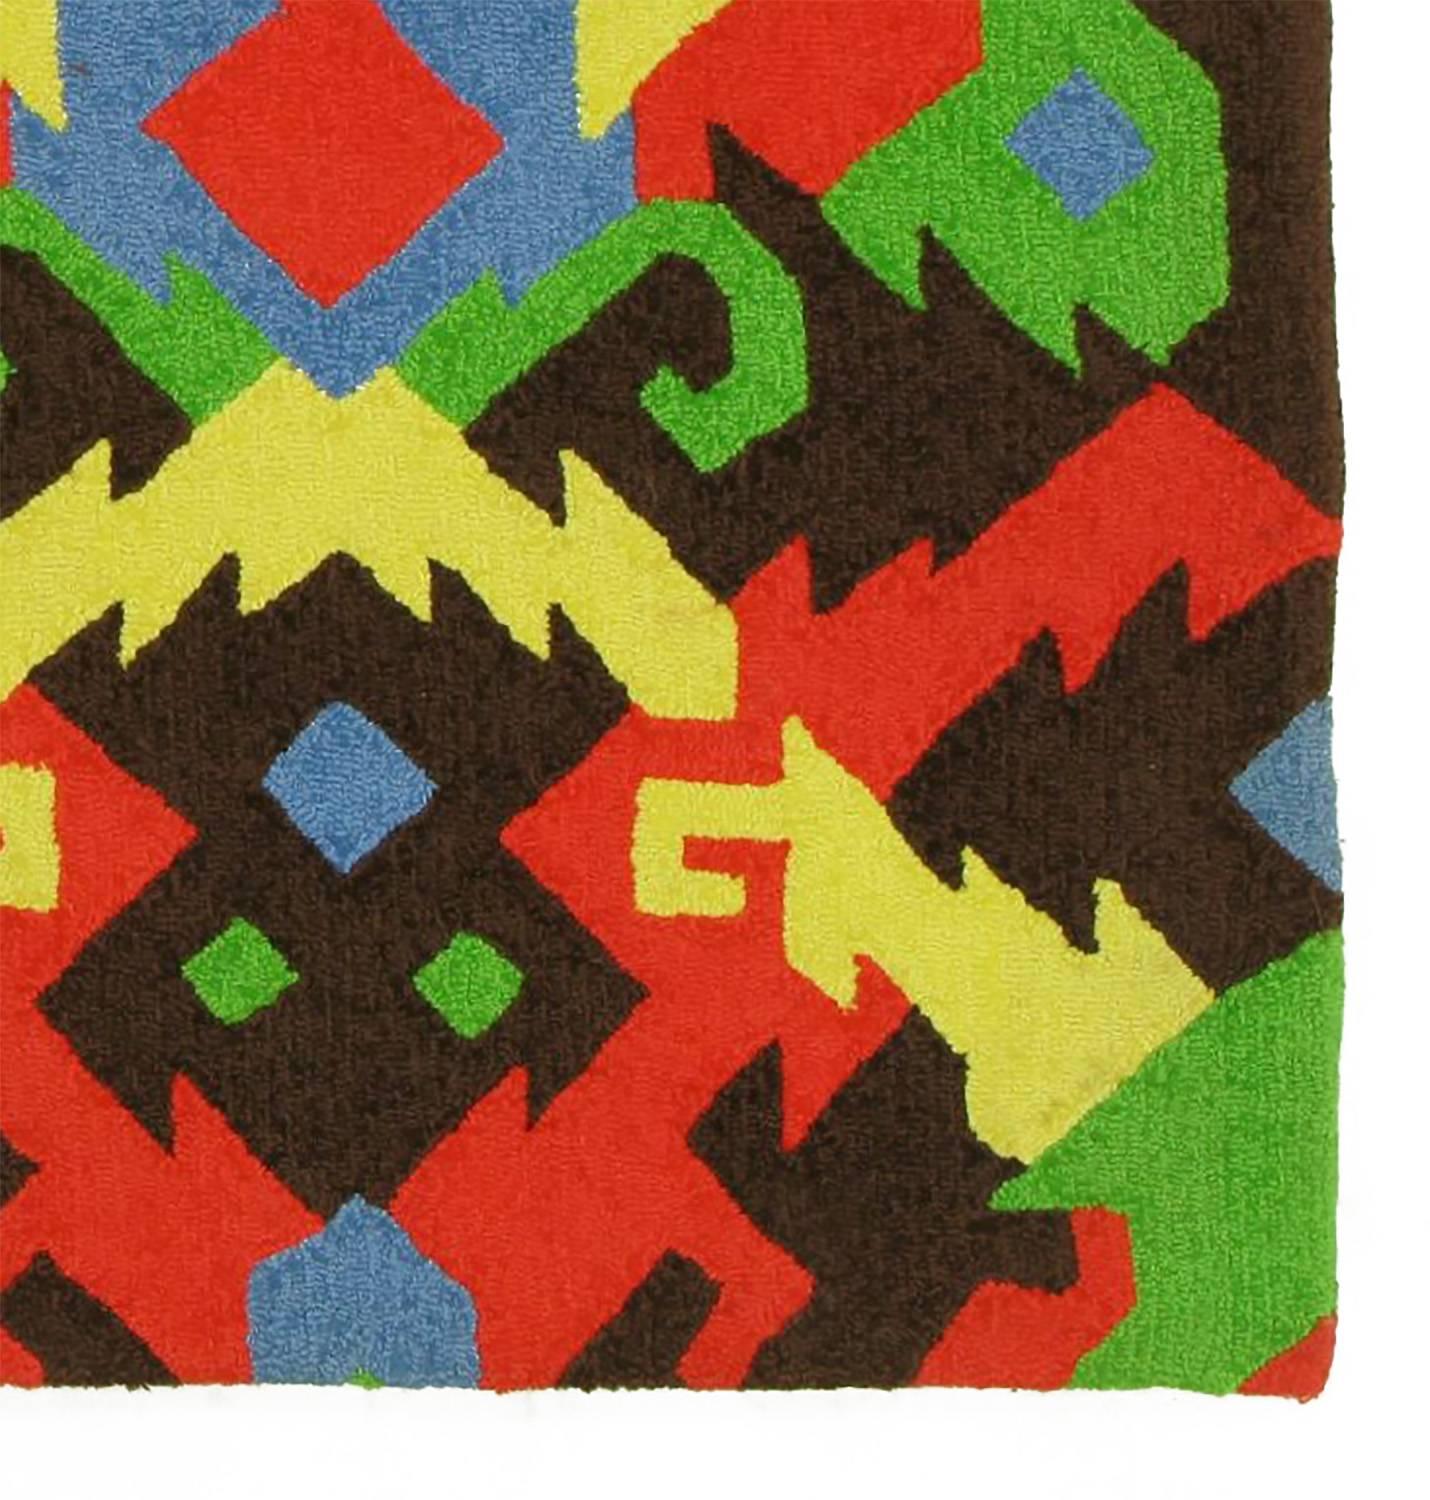 Pair of 1972 Edward Fields Colorful Geometric Rugs 2